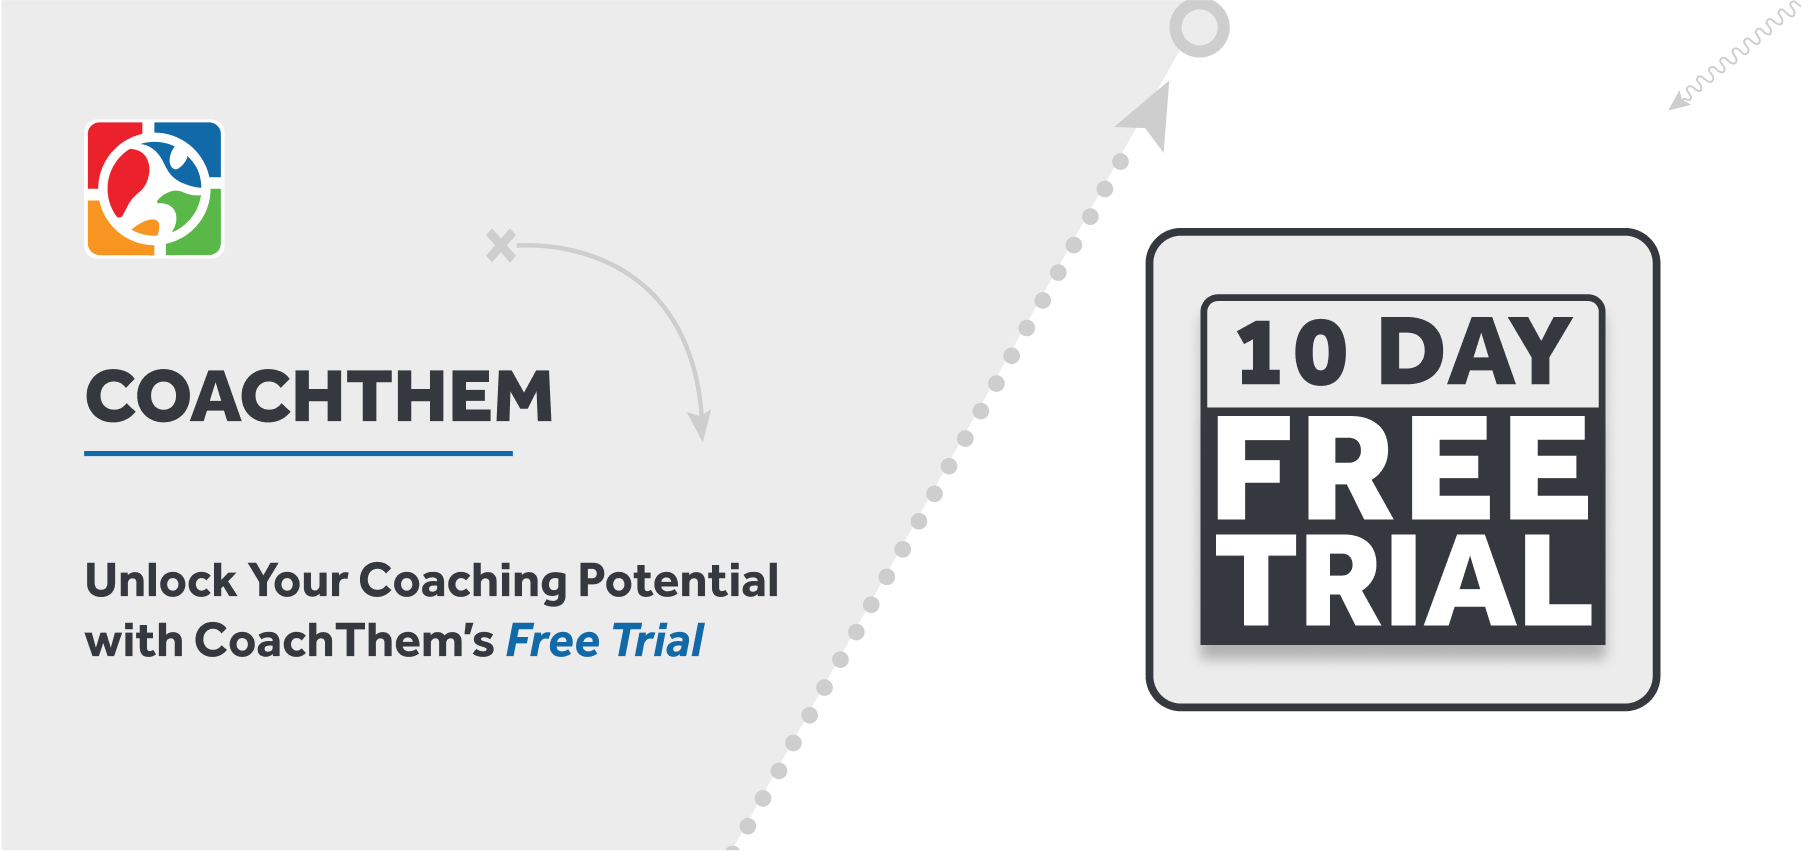 Unlock Your Coaching Potential with CoachThem’s Free Trial